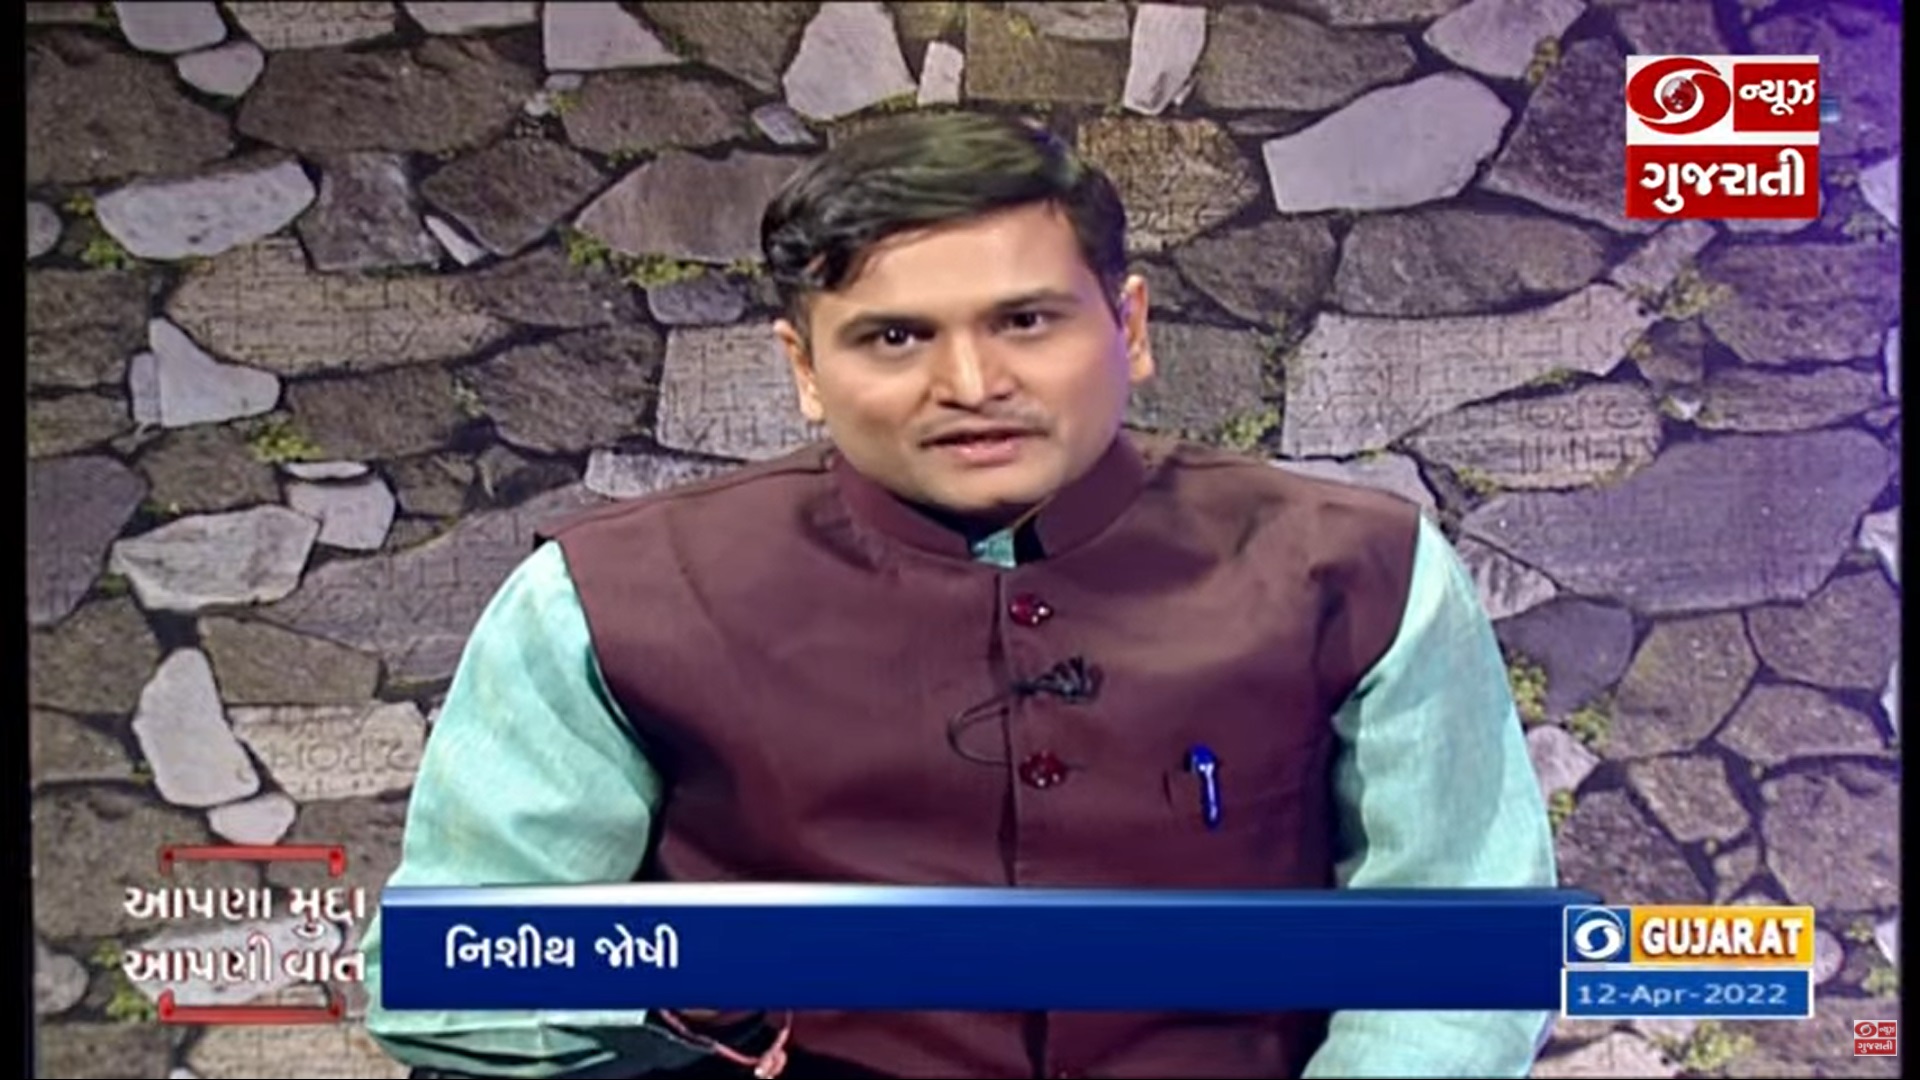 	DD Girnar News Channel on invited Nilesh Mandlewala, Founder & President of Donate Life organization as a specialist in a discussion on Angdaan-Mahadaan in the program Aapana Mudda, Aapani Vat.